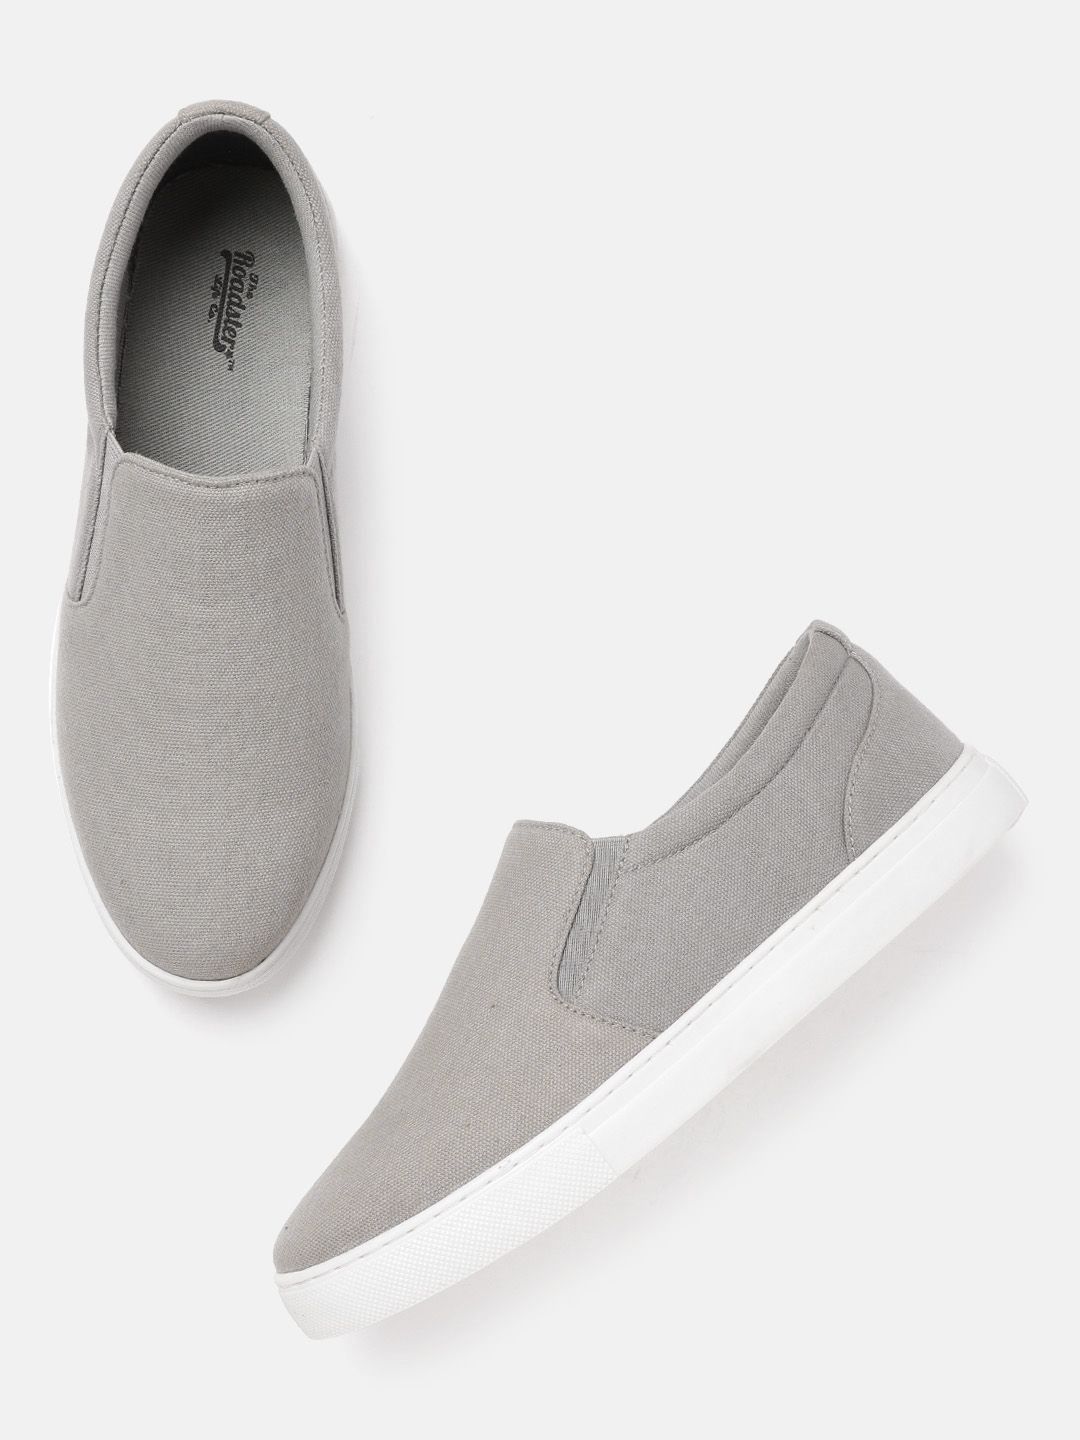 The Roadster Lifestyle Co Women Grey Solid Slip-On Sneakers Price in India